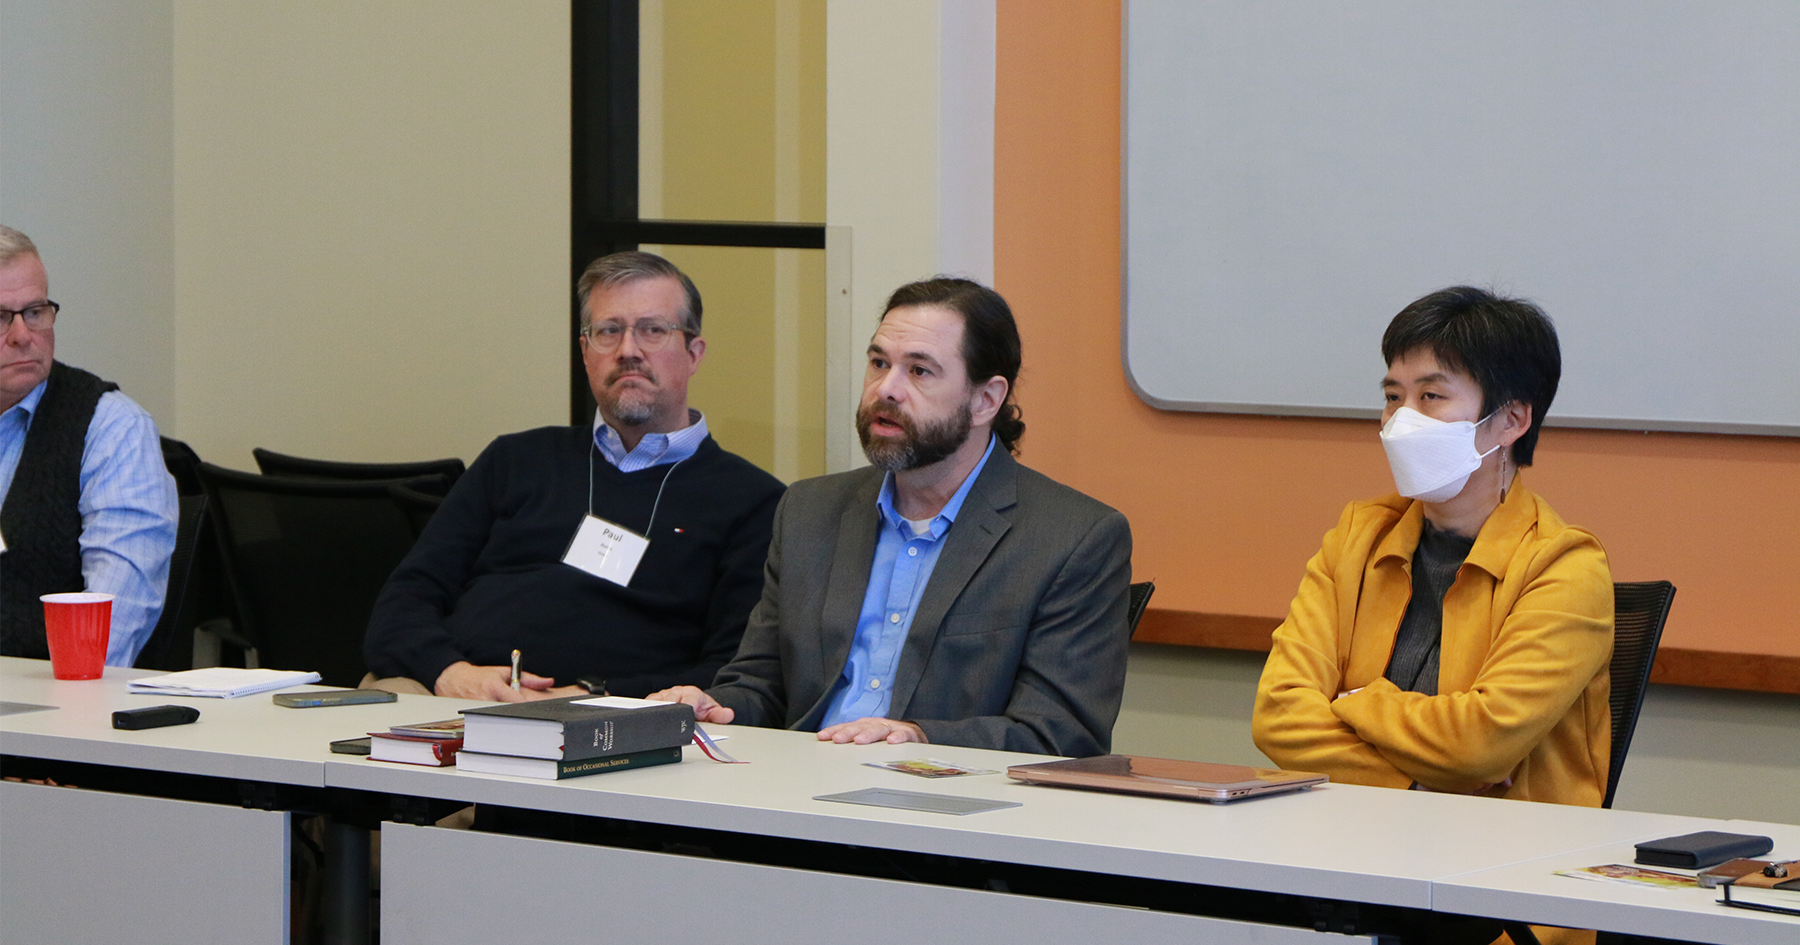 Presenters during the “Tools for Thinking, Praying and Living the Faith Day by Day” workshop at the Moderators’ Conference included the Rev. Dr. David Gambrell, center, and the Rev. Dr. So Jung Kim, both in the Office of Theology & Worship.